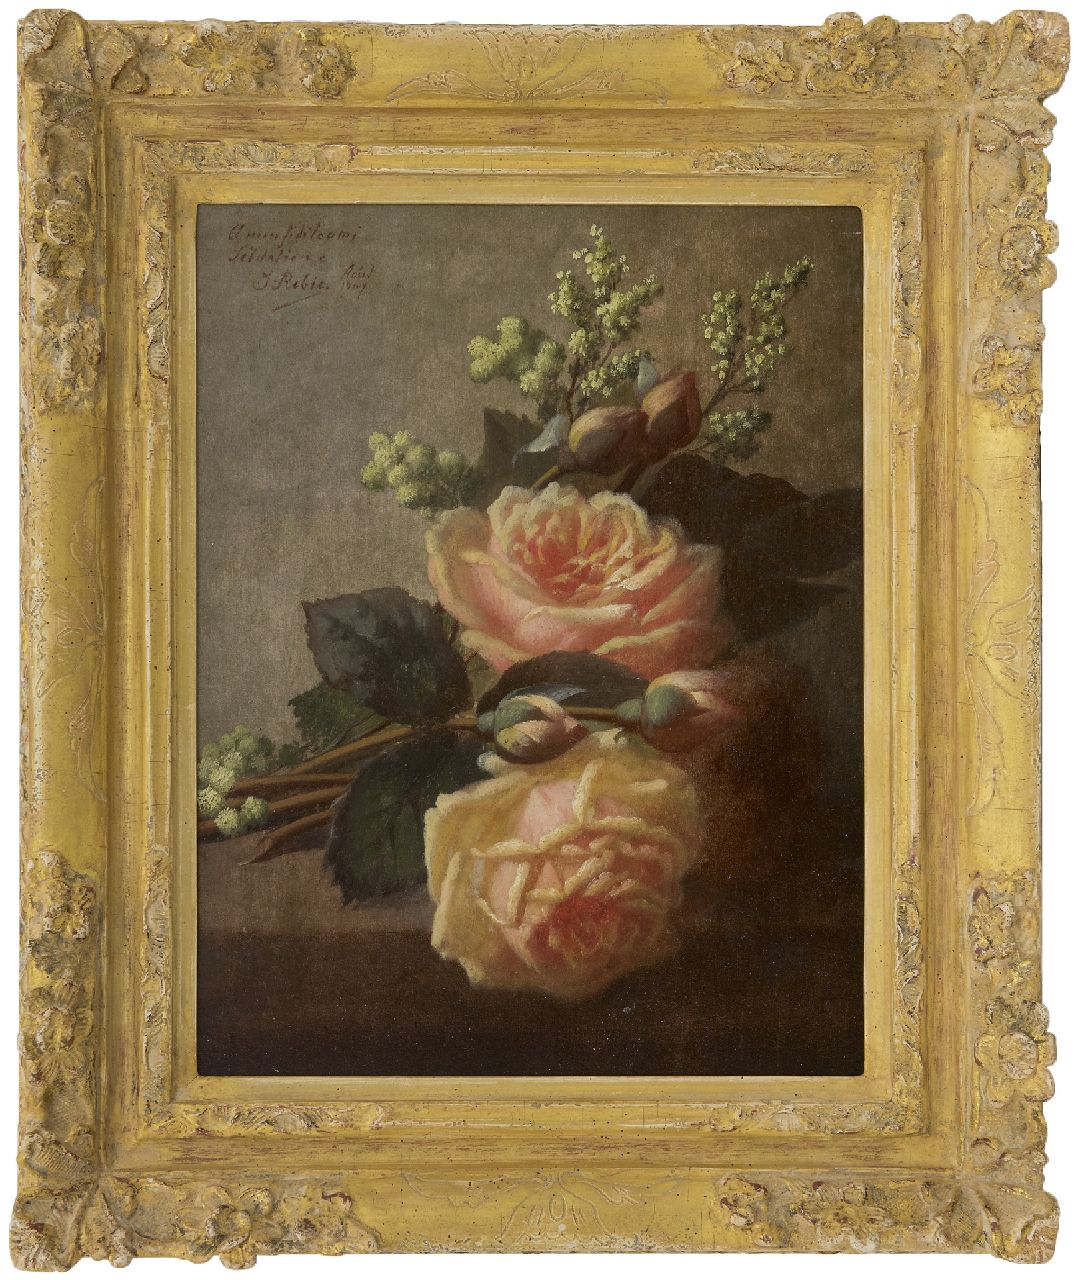 Robie J.B.  | Jean-Baptiste Robie | Paintings offered for sale | Roses on a ledge, oil on panel 36.3 x 27.0 cm, signed u.l. and dated 'Août' 1907